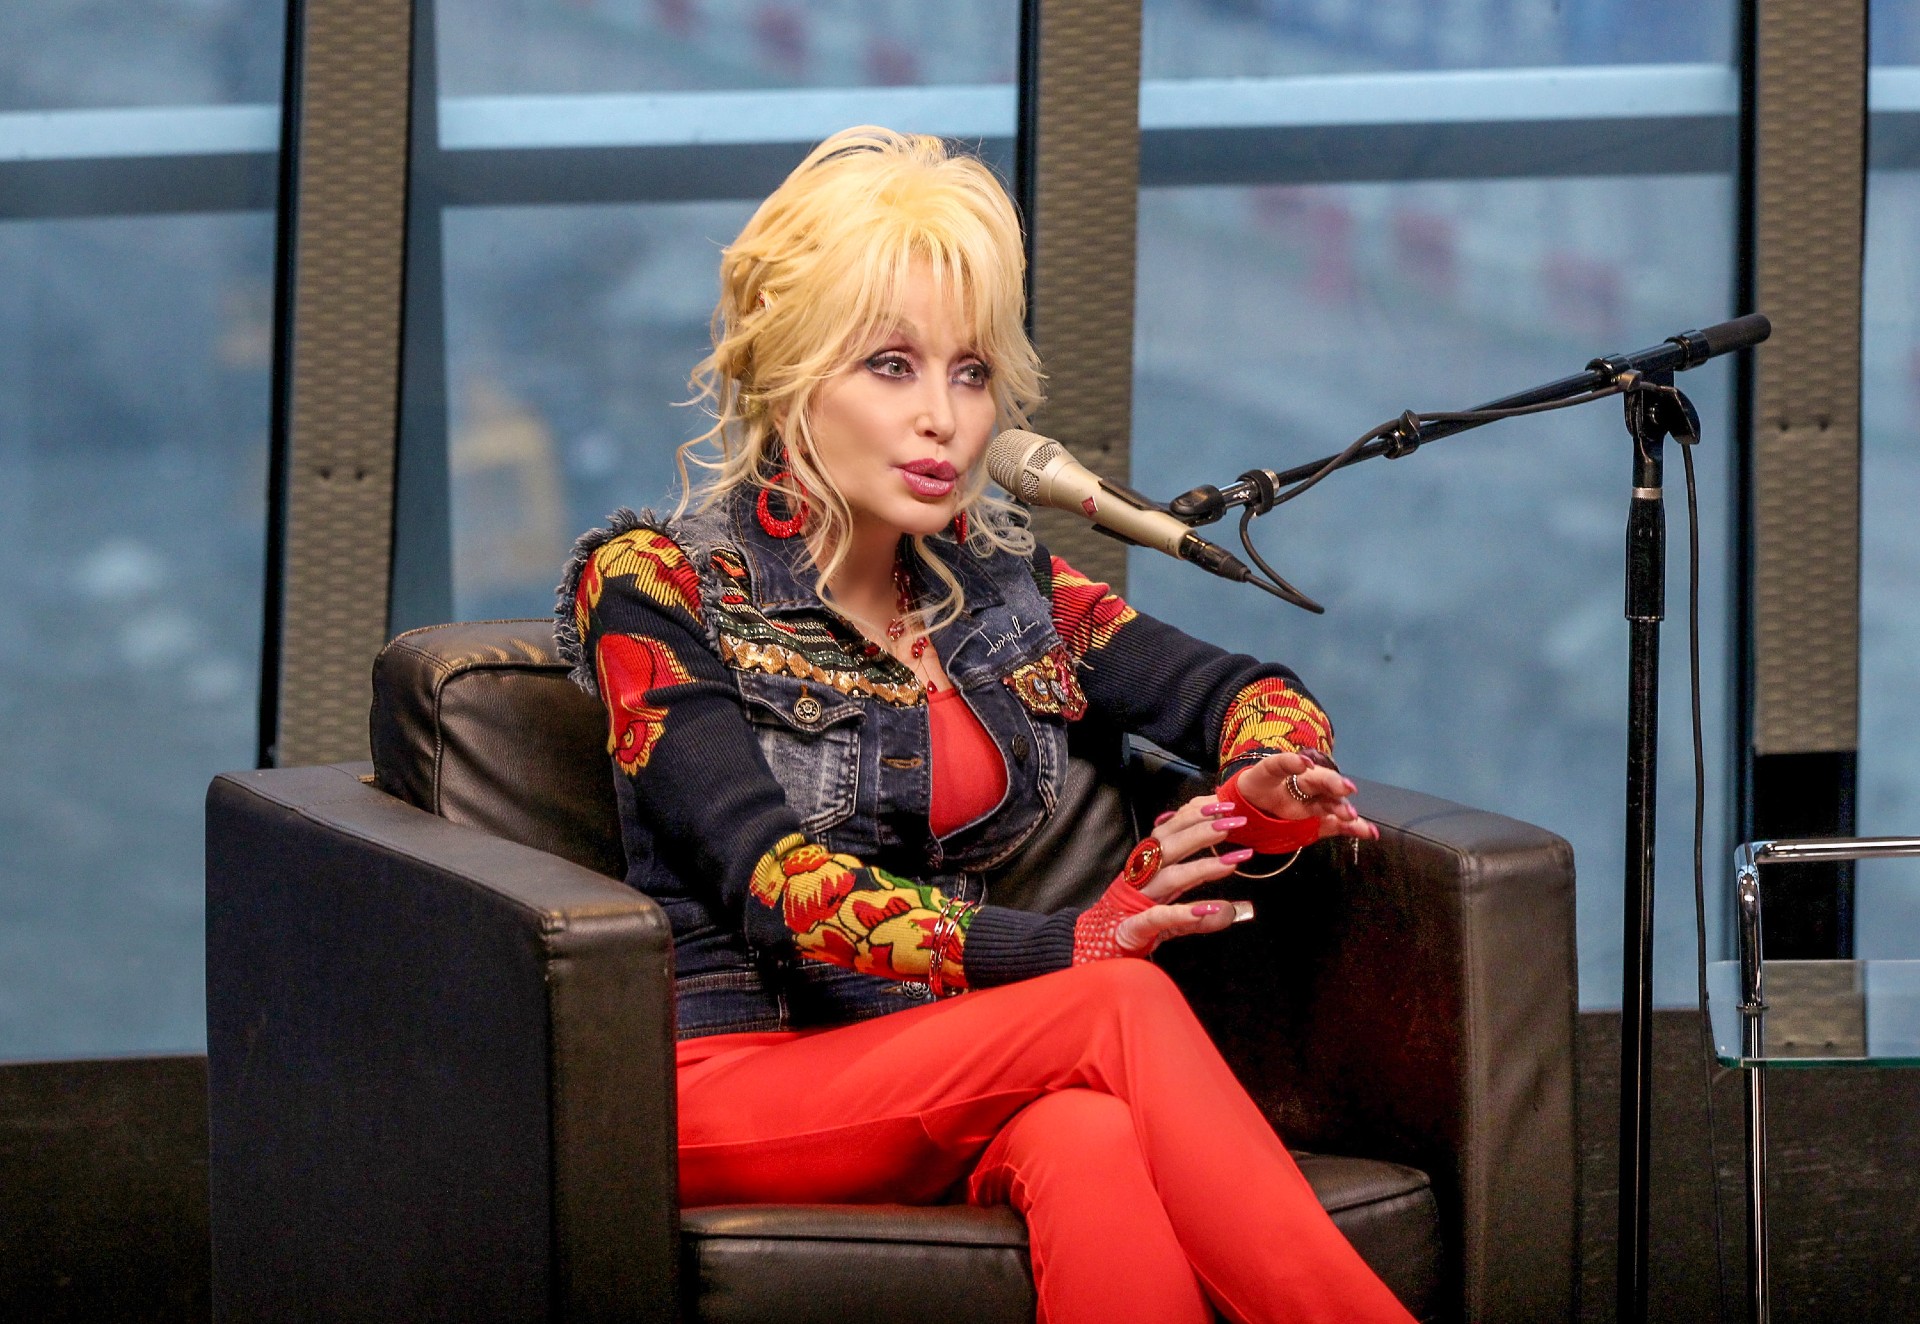 Dolly Parton sits on a couch while talking into a microphone and wearing a red outfit